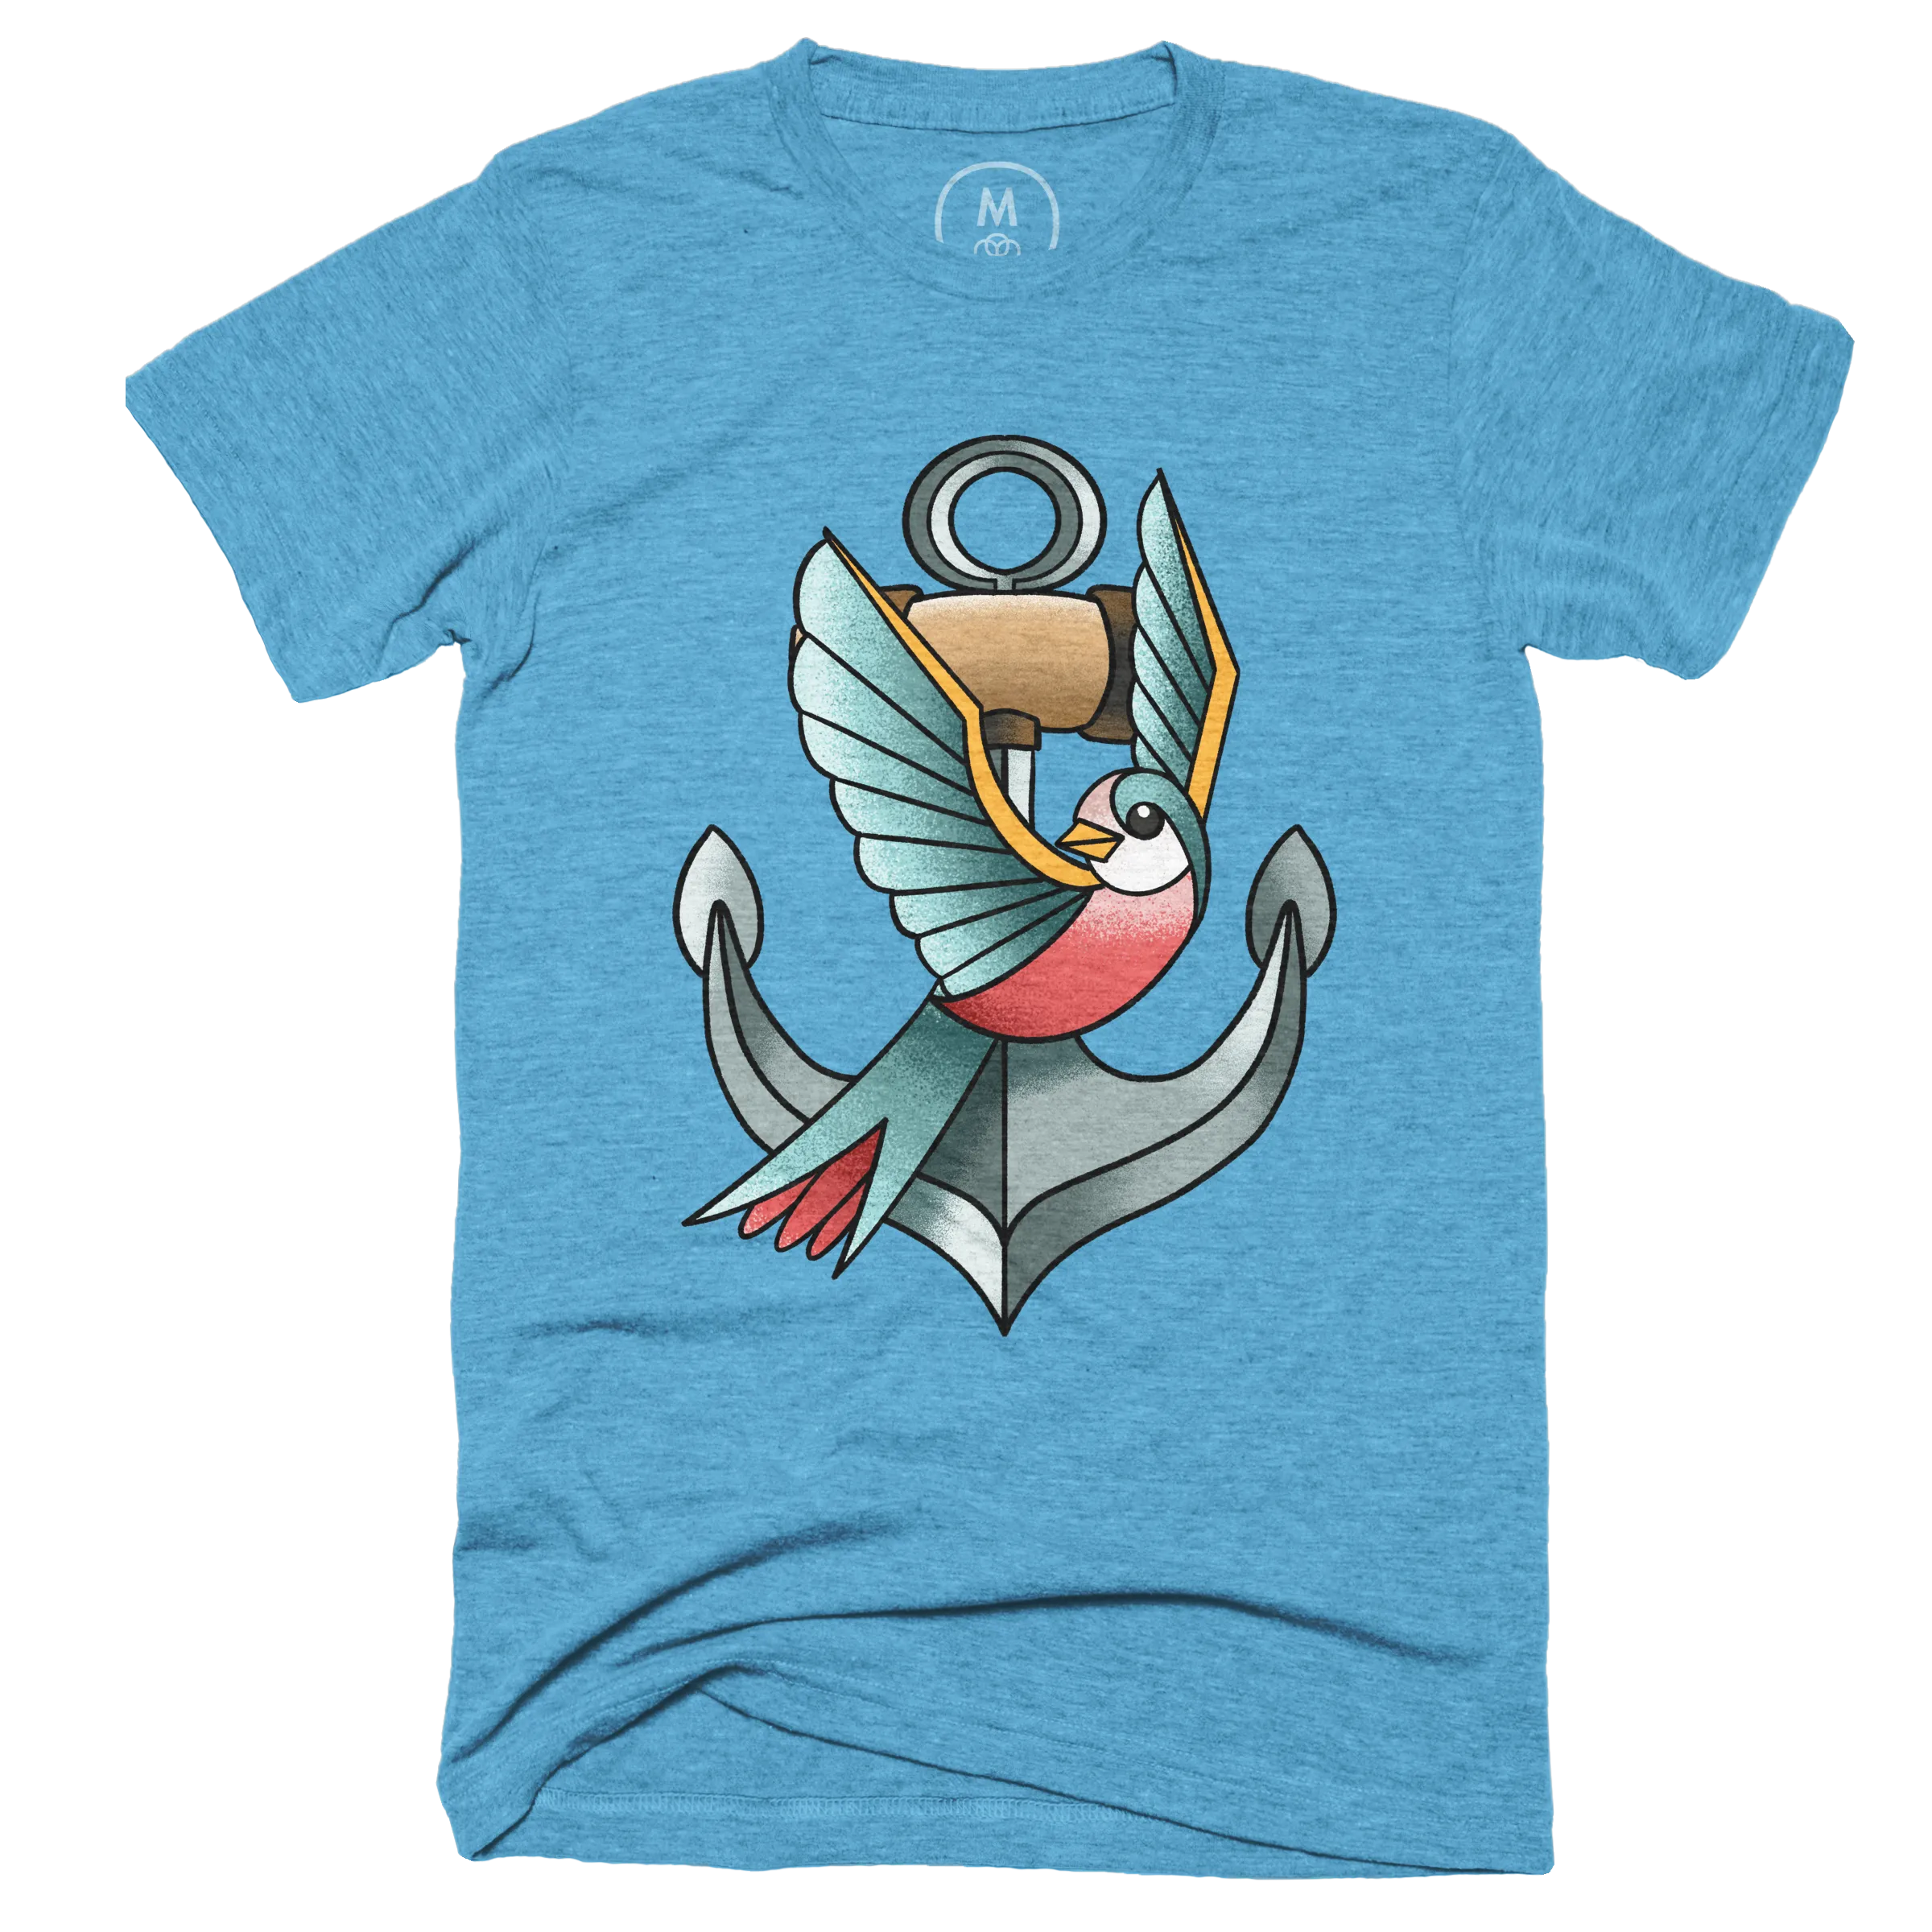 Ahoy, Sailor” graphic tee, tank, onesie, pullover crewneck, and long sleeve  tee by Penxink.